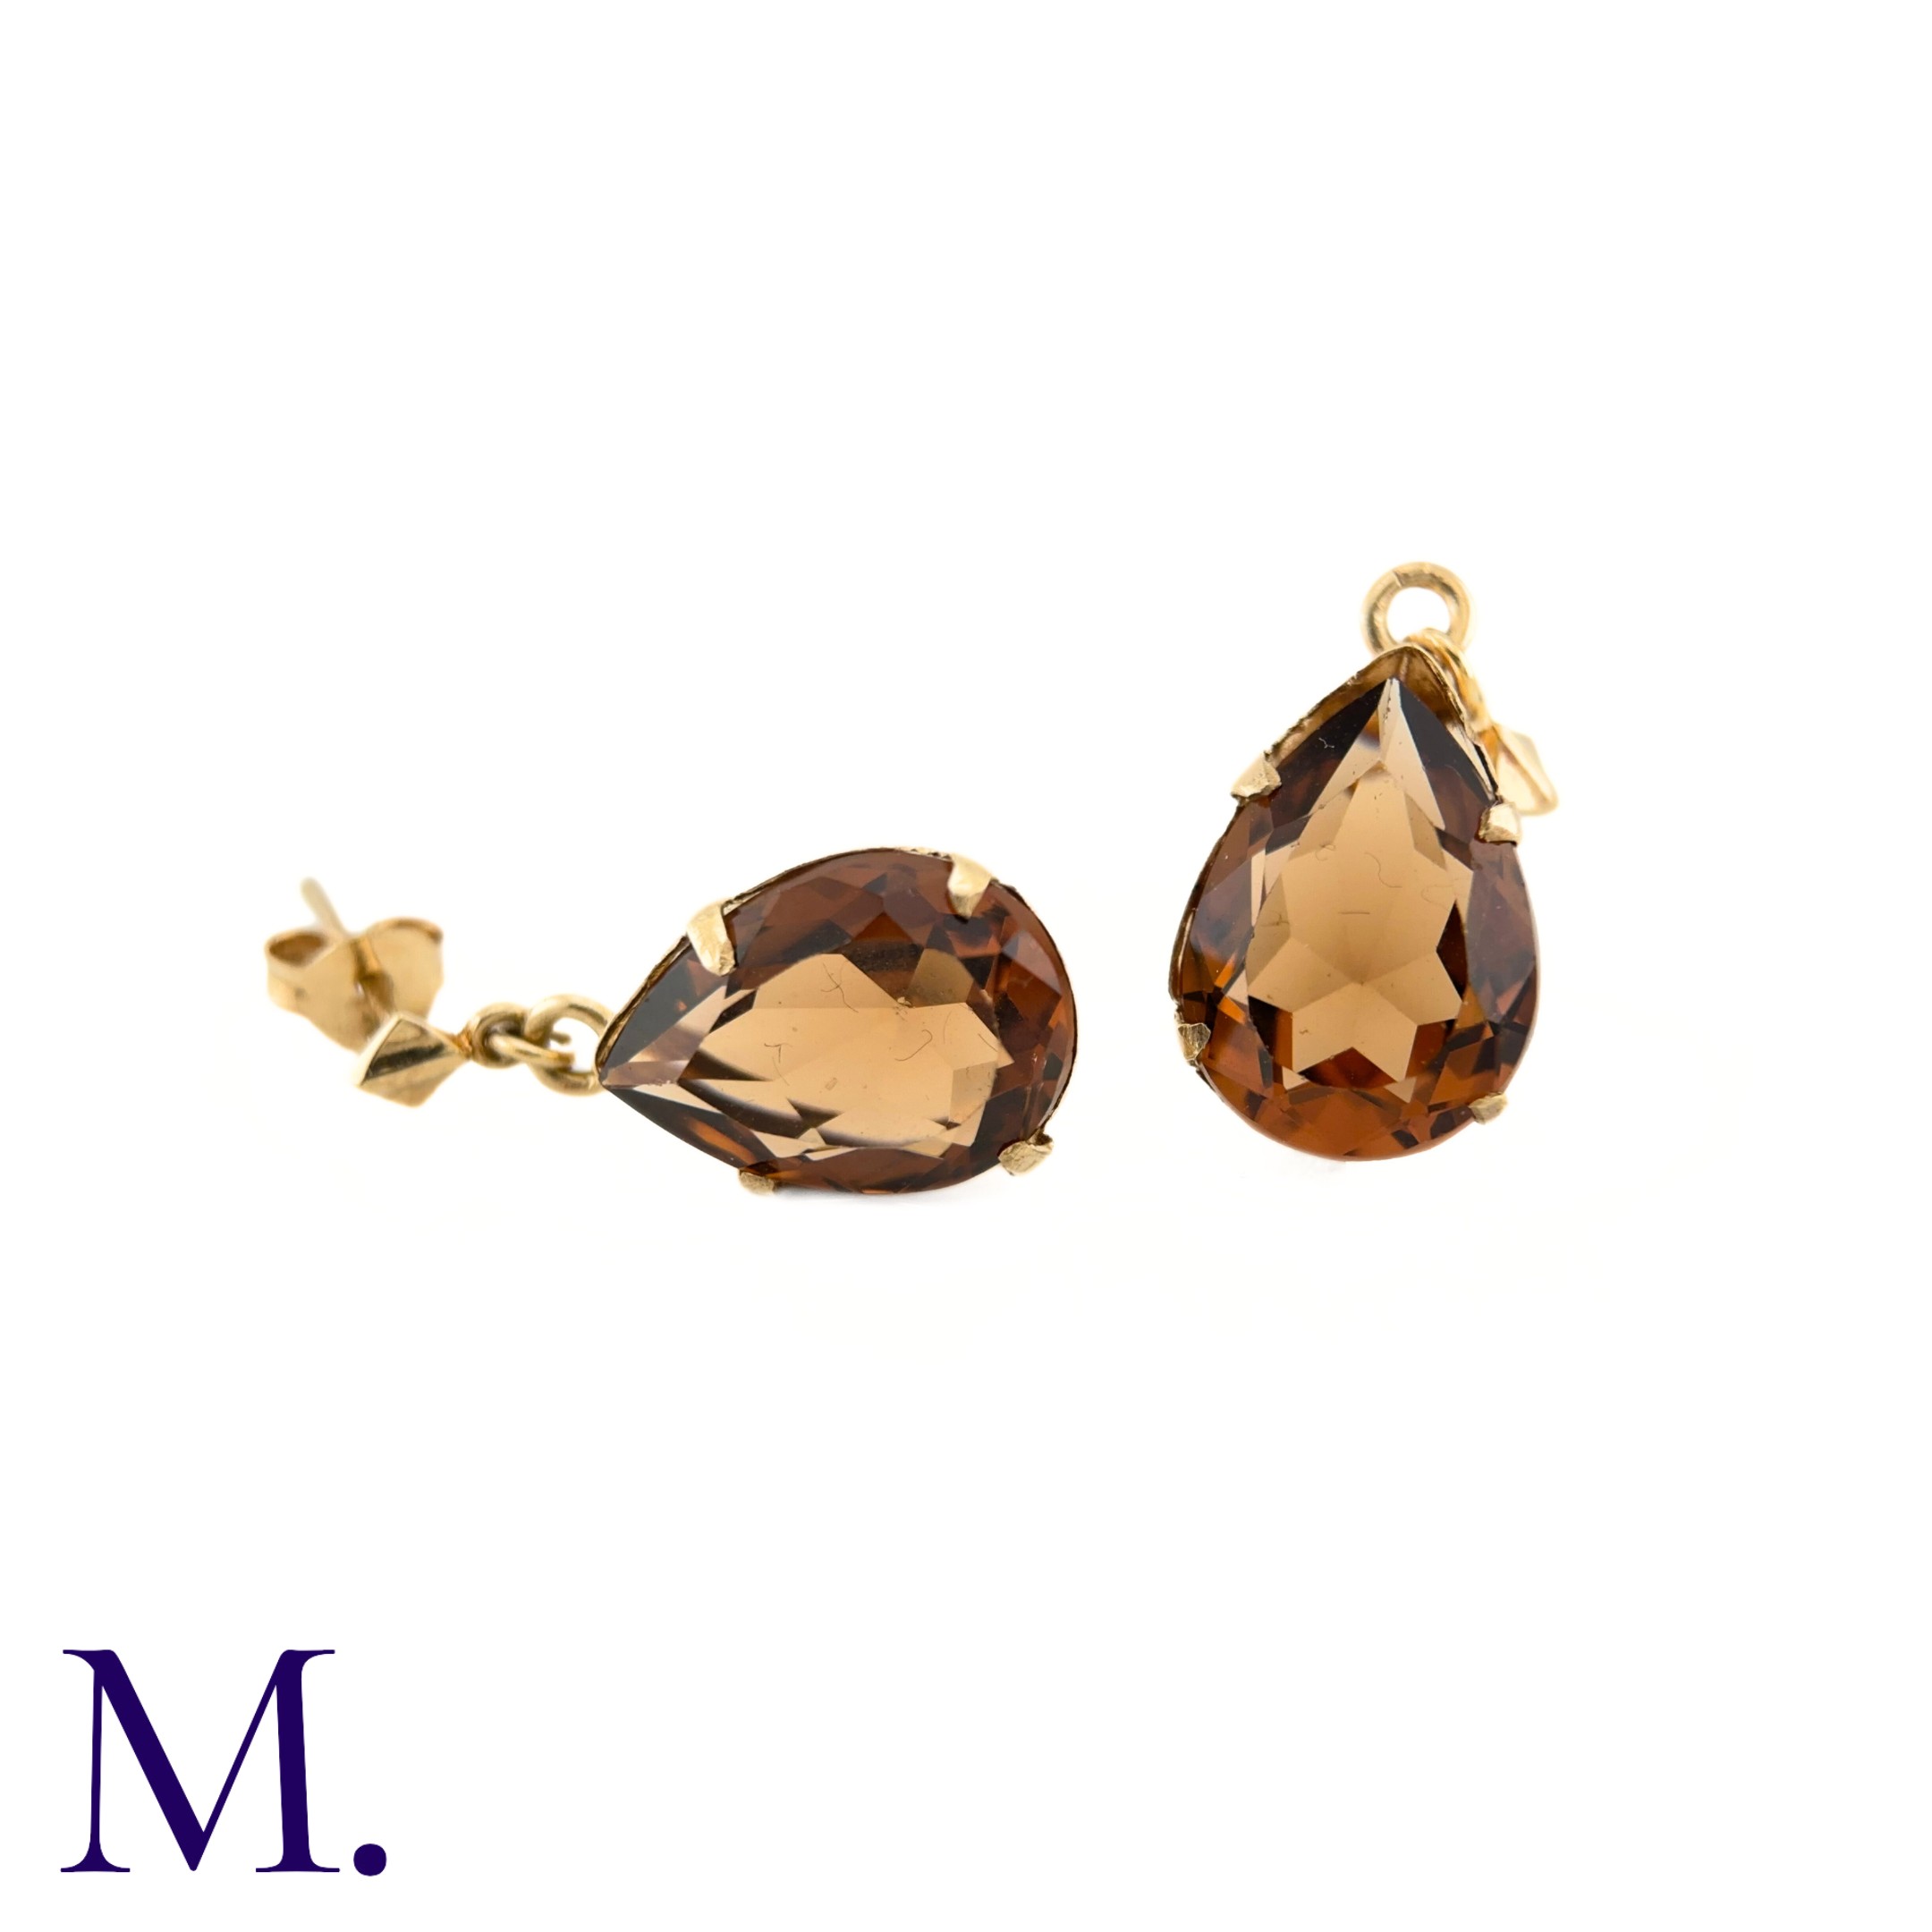 A Pair of Gemstone Earrings The 9ct yellow gold earrings are set with a burnt orange-brown pear- - Image 2 of 4